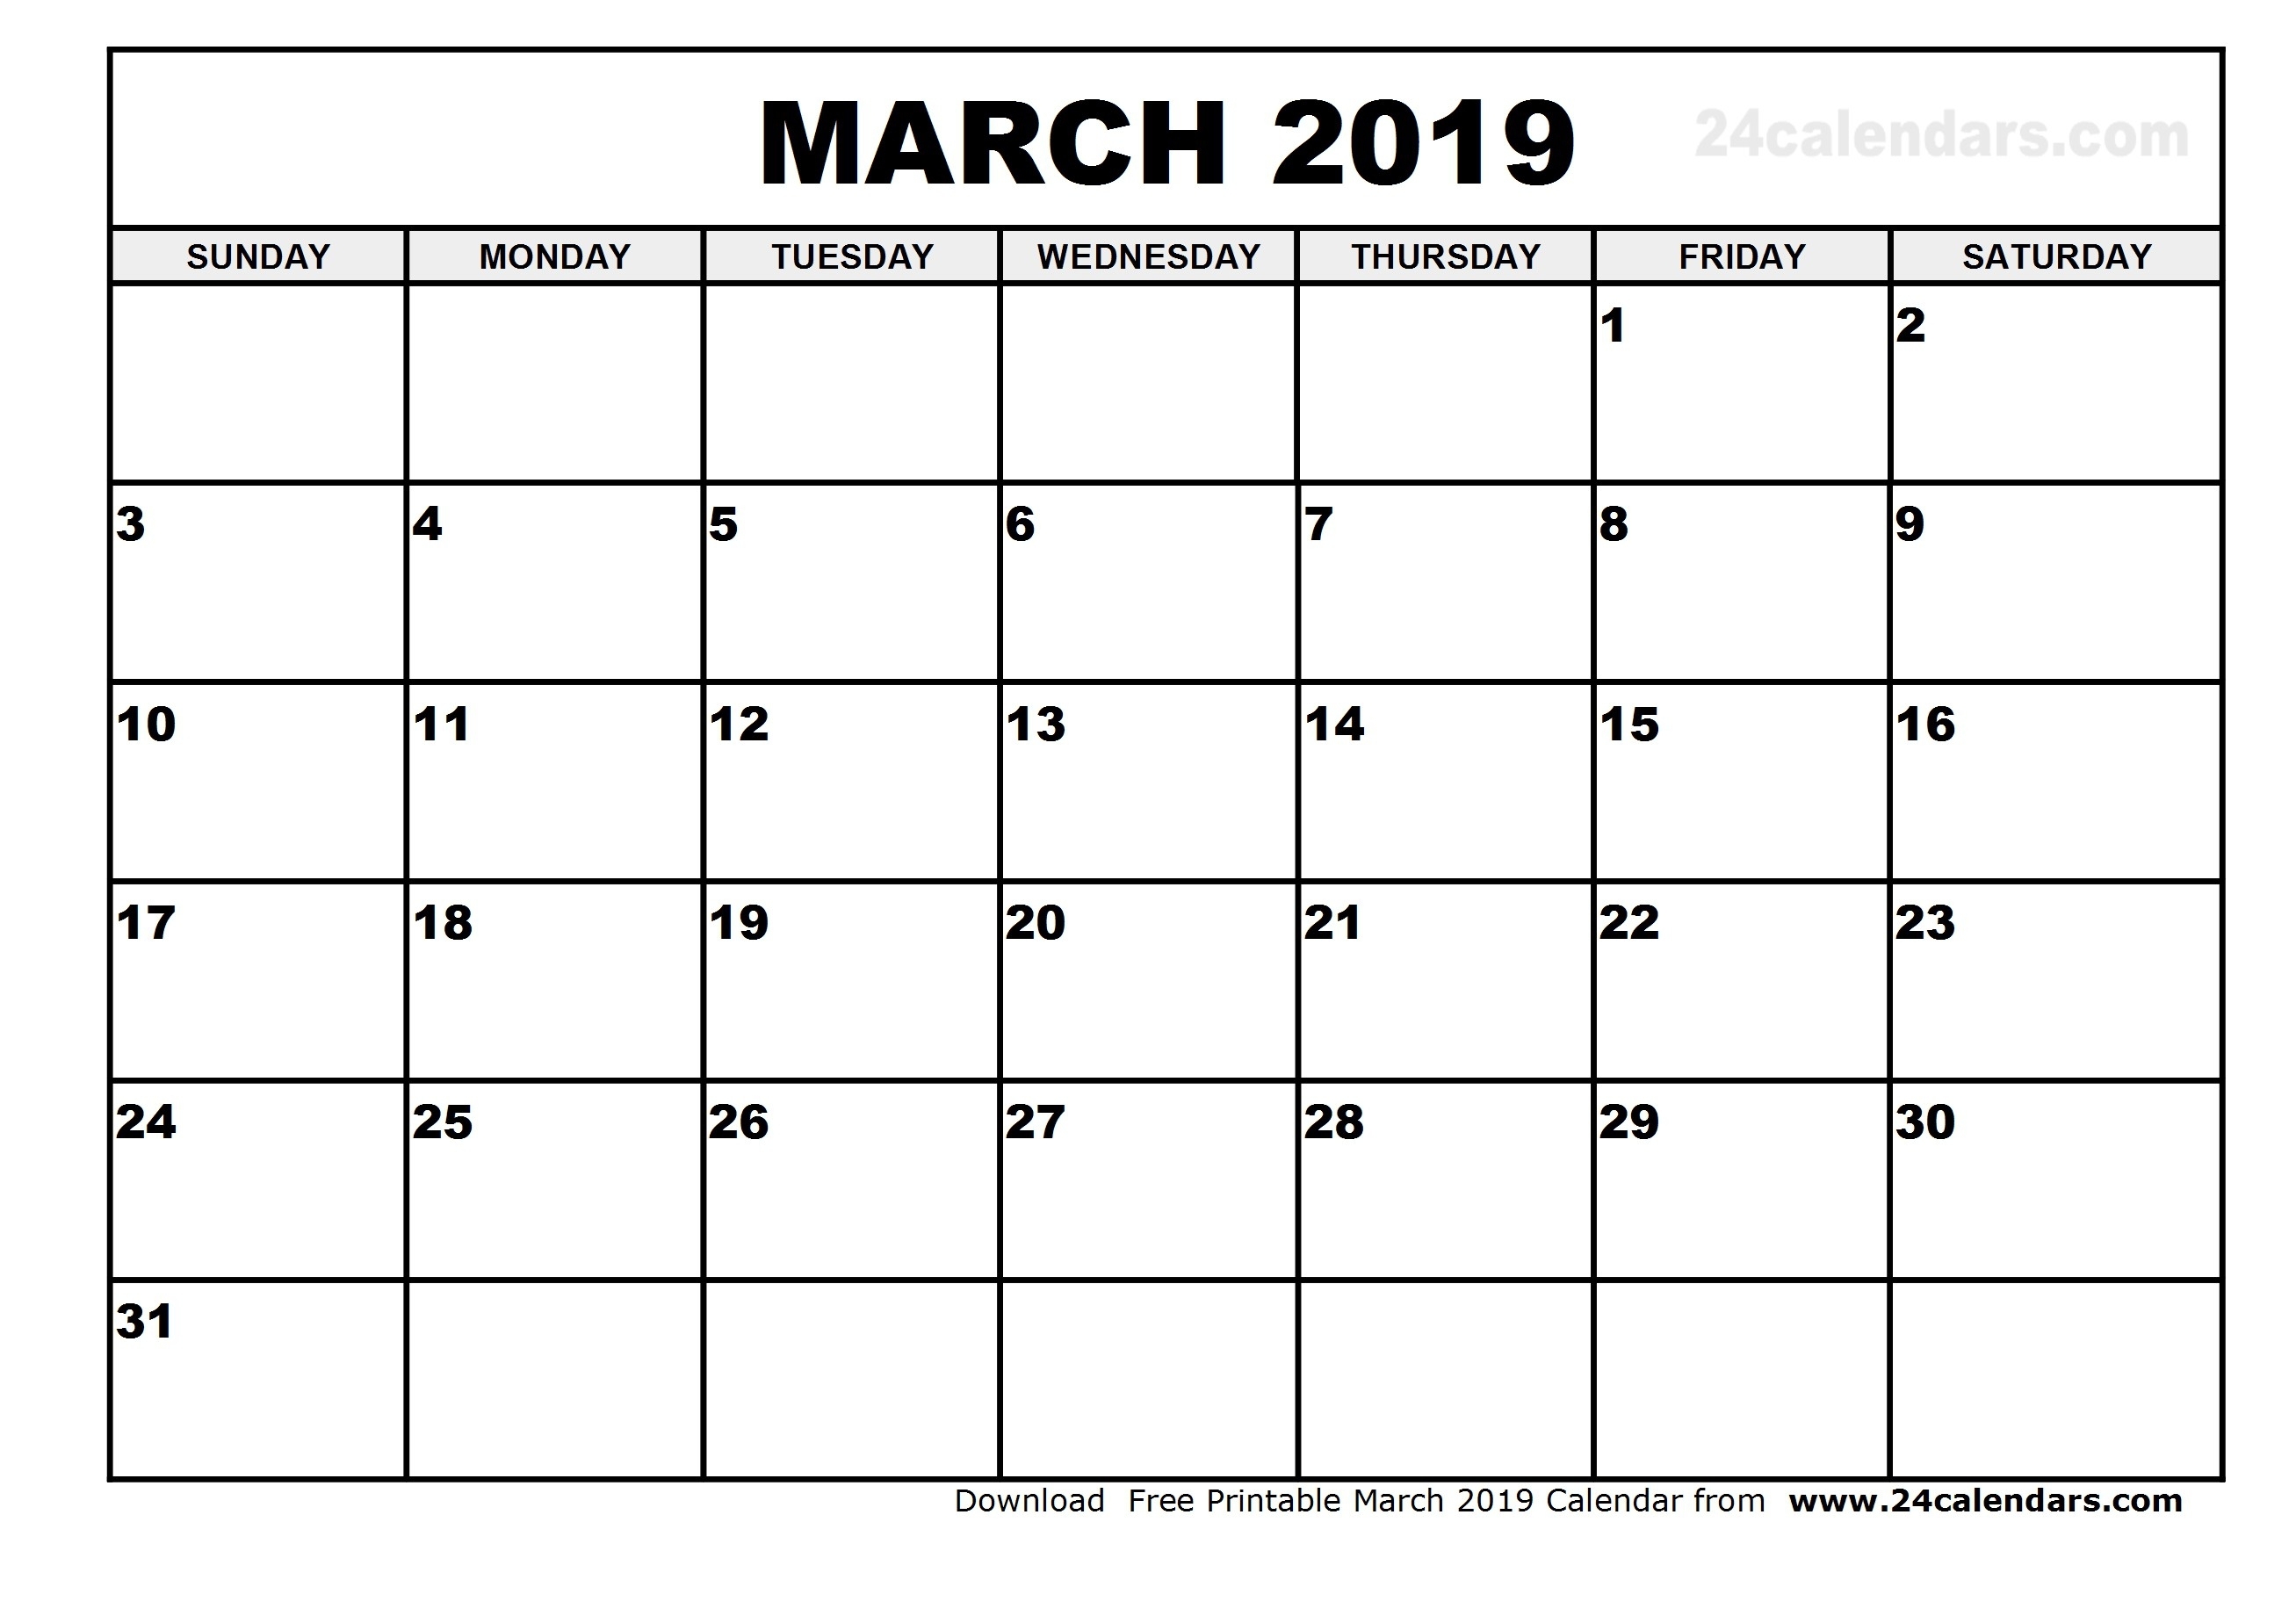 Printable Monthly Calendar Template 2019 - Maco.palmex.co pertaining to Free Editable And Printable Monthly Calendar